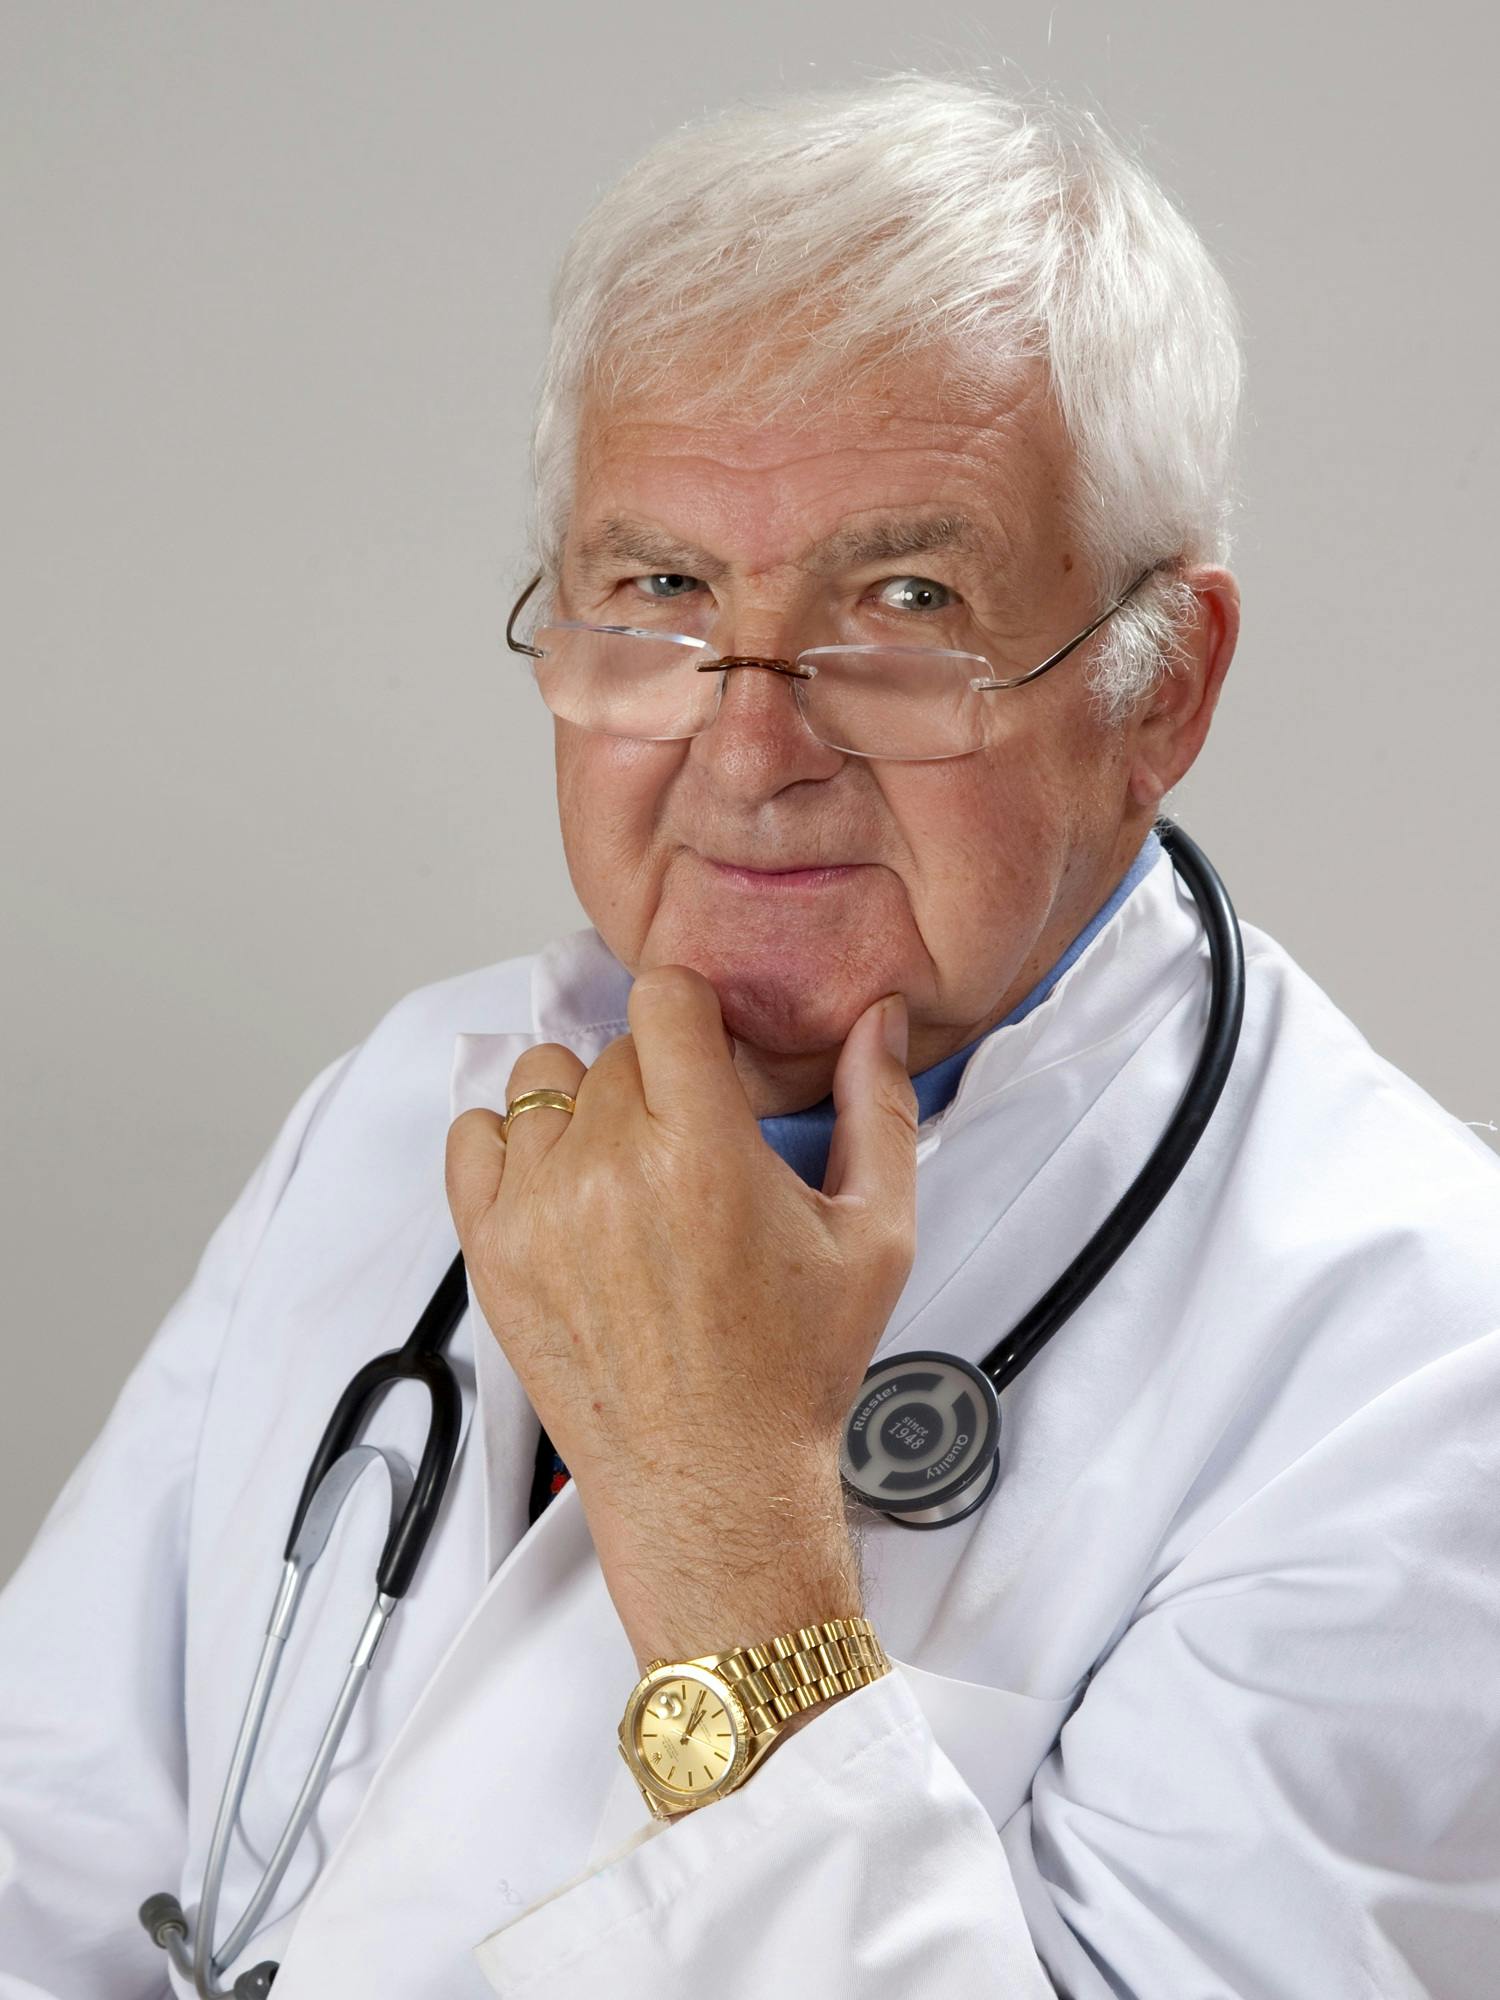 Doctor carrying a stethoscope | Photo: Pexels